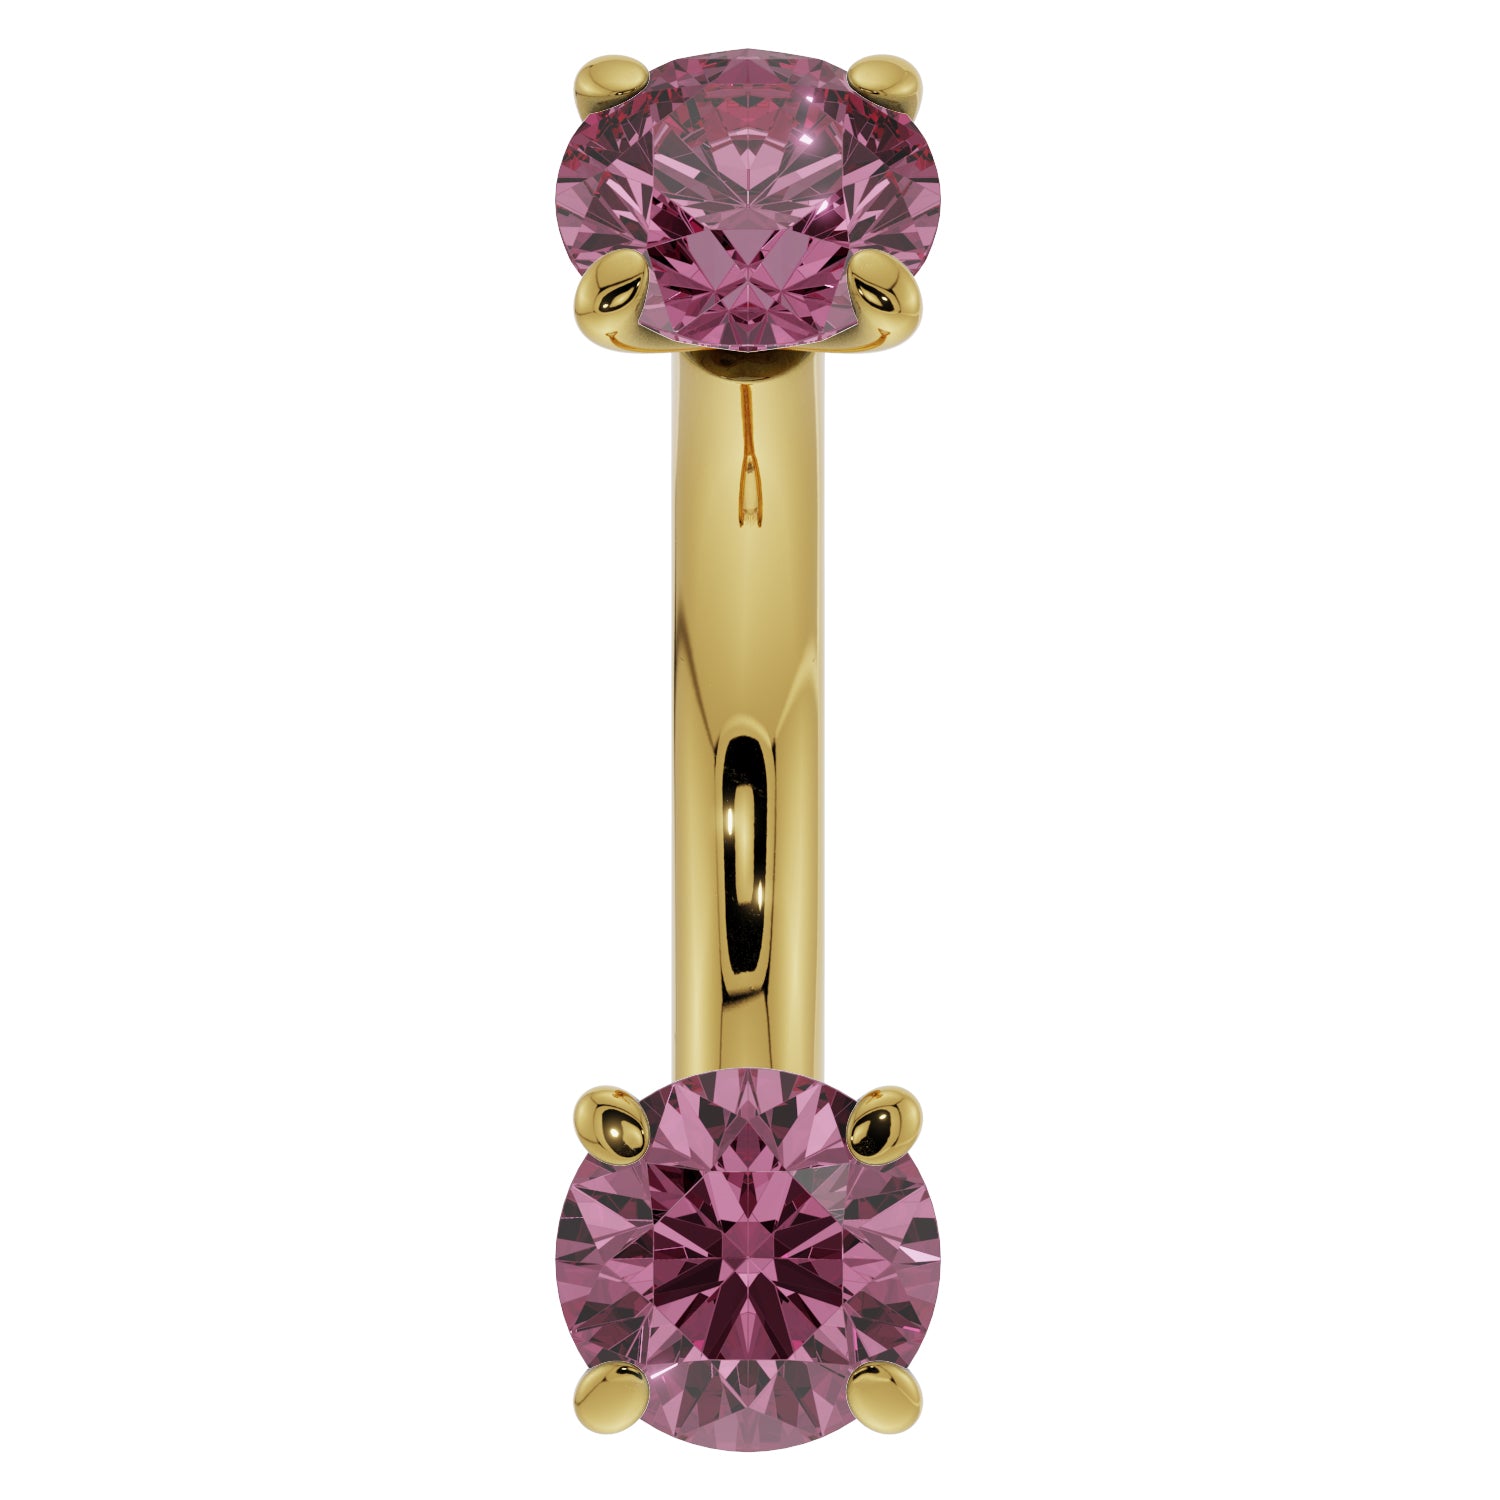 Pink Sapphire Prong-Set Eyebrow Rook Belly Curved Barbell-14K Yellow Gold   14G (1.6mm) (Belly Ring)   7 16